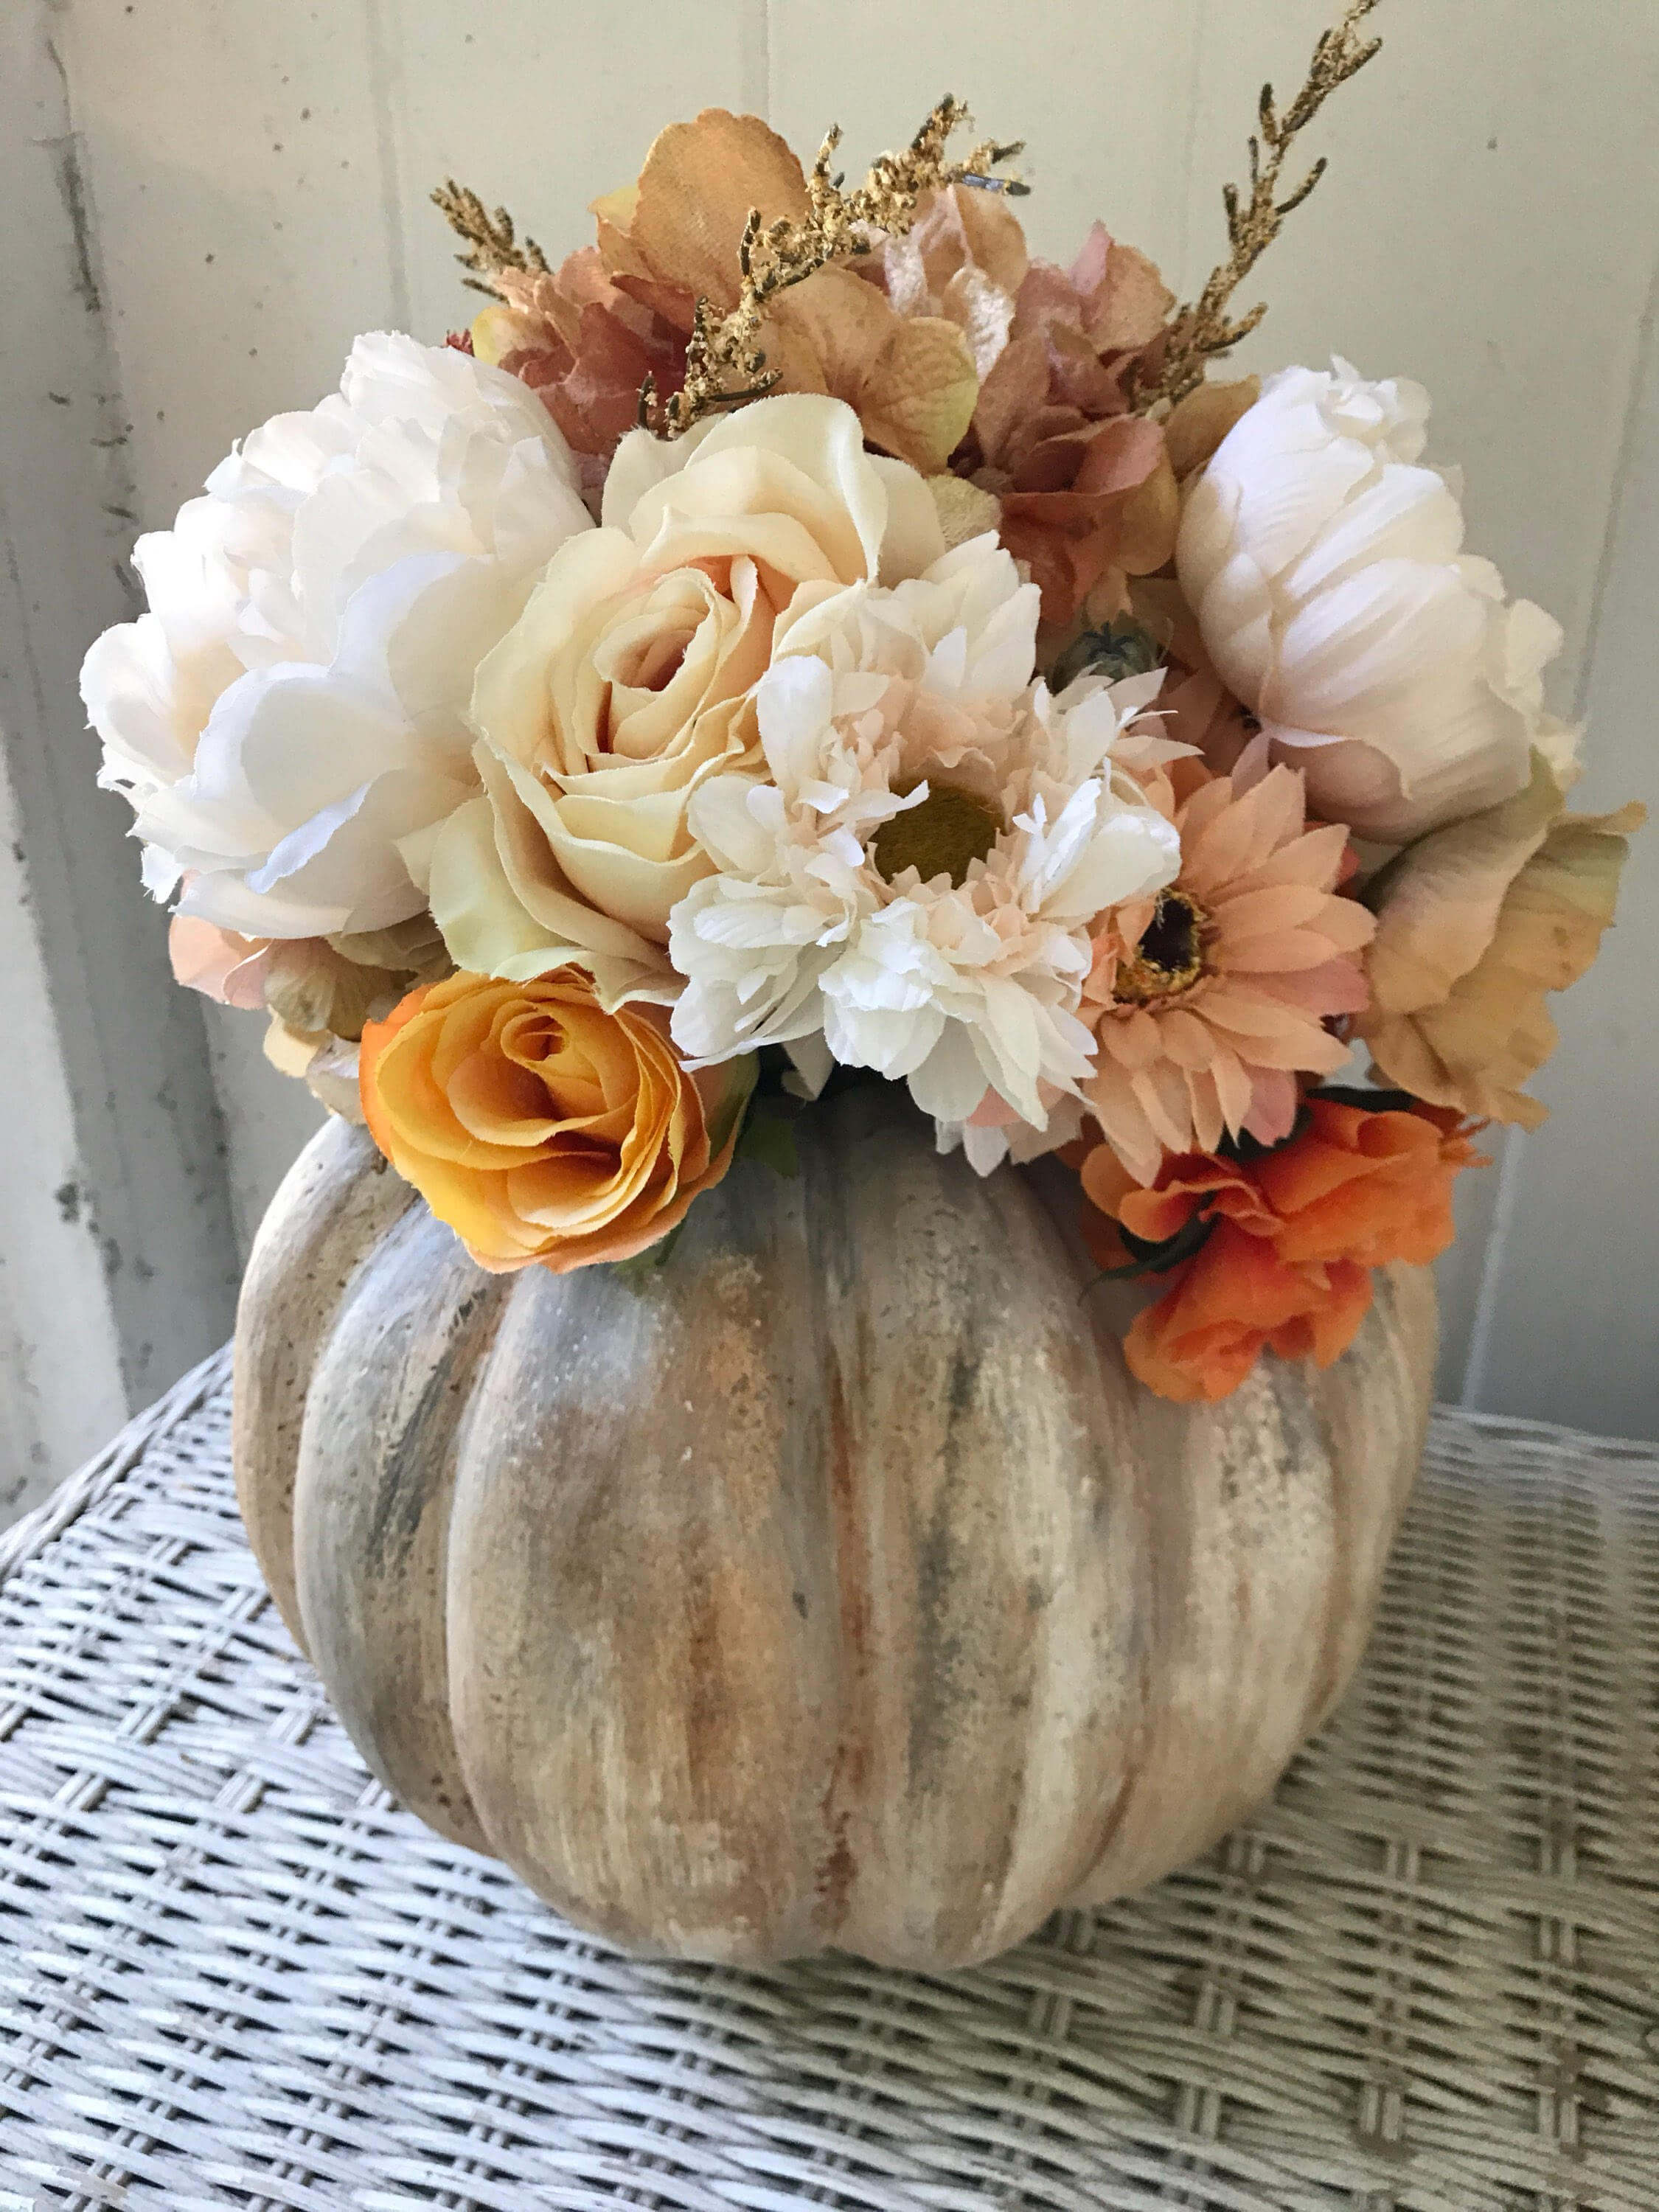 14 Best Rustic Fall Decor and Design Ideas for 2020